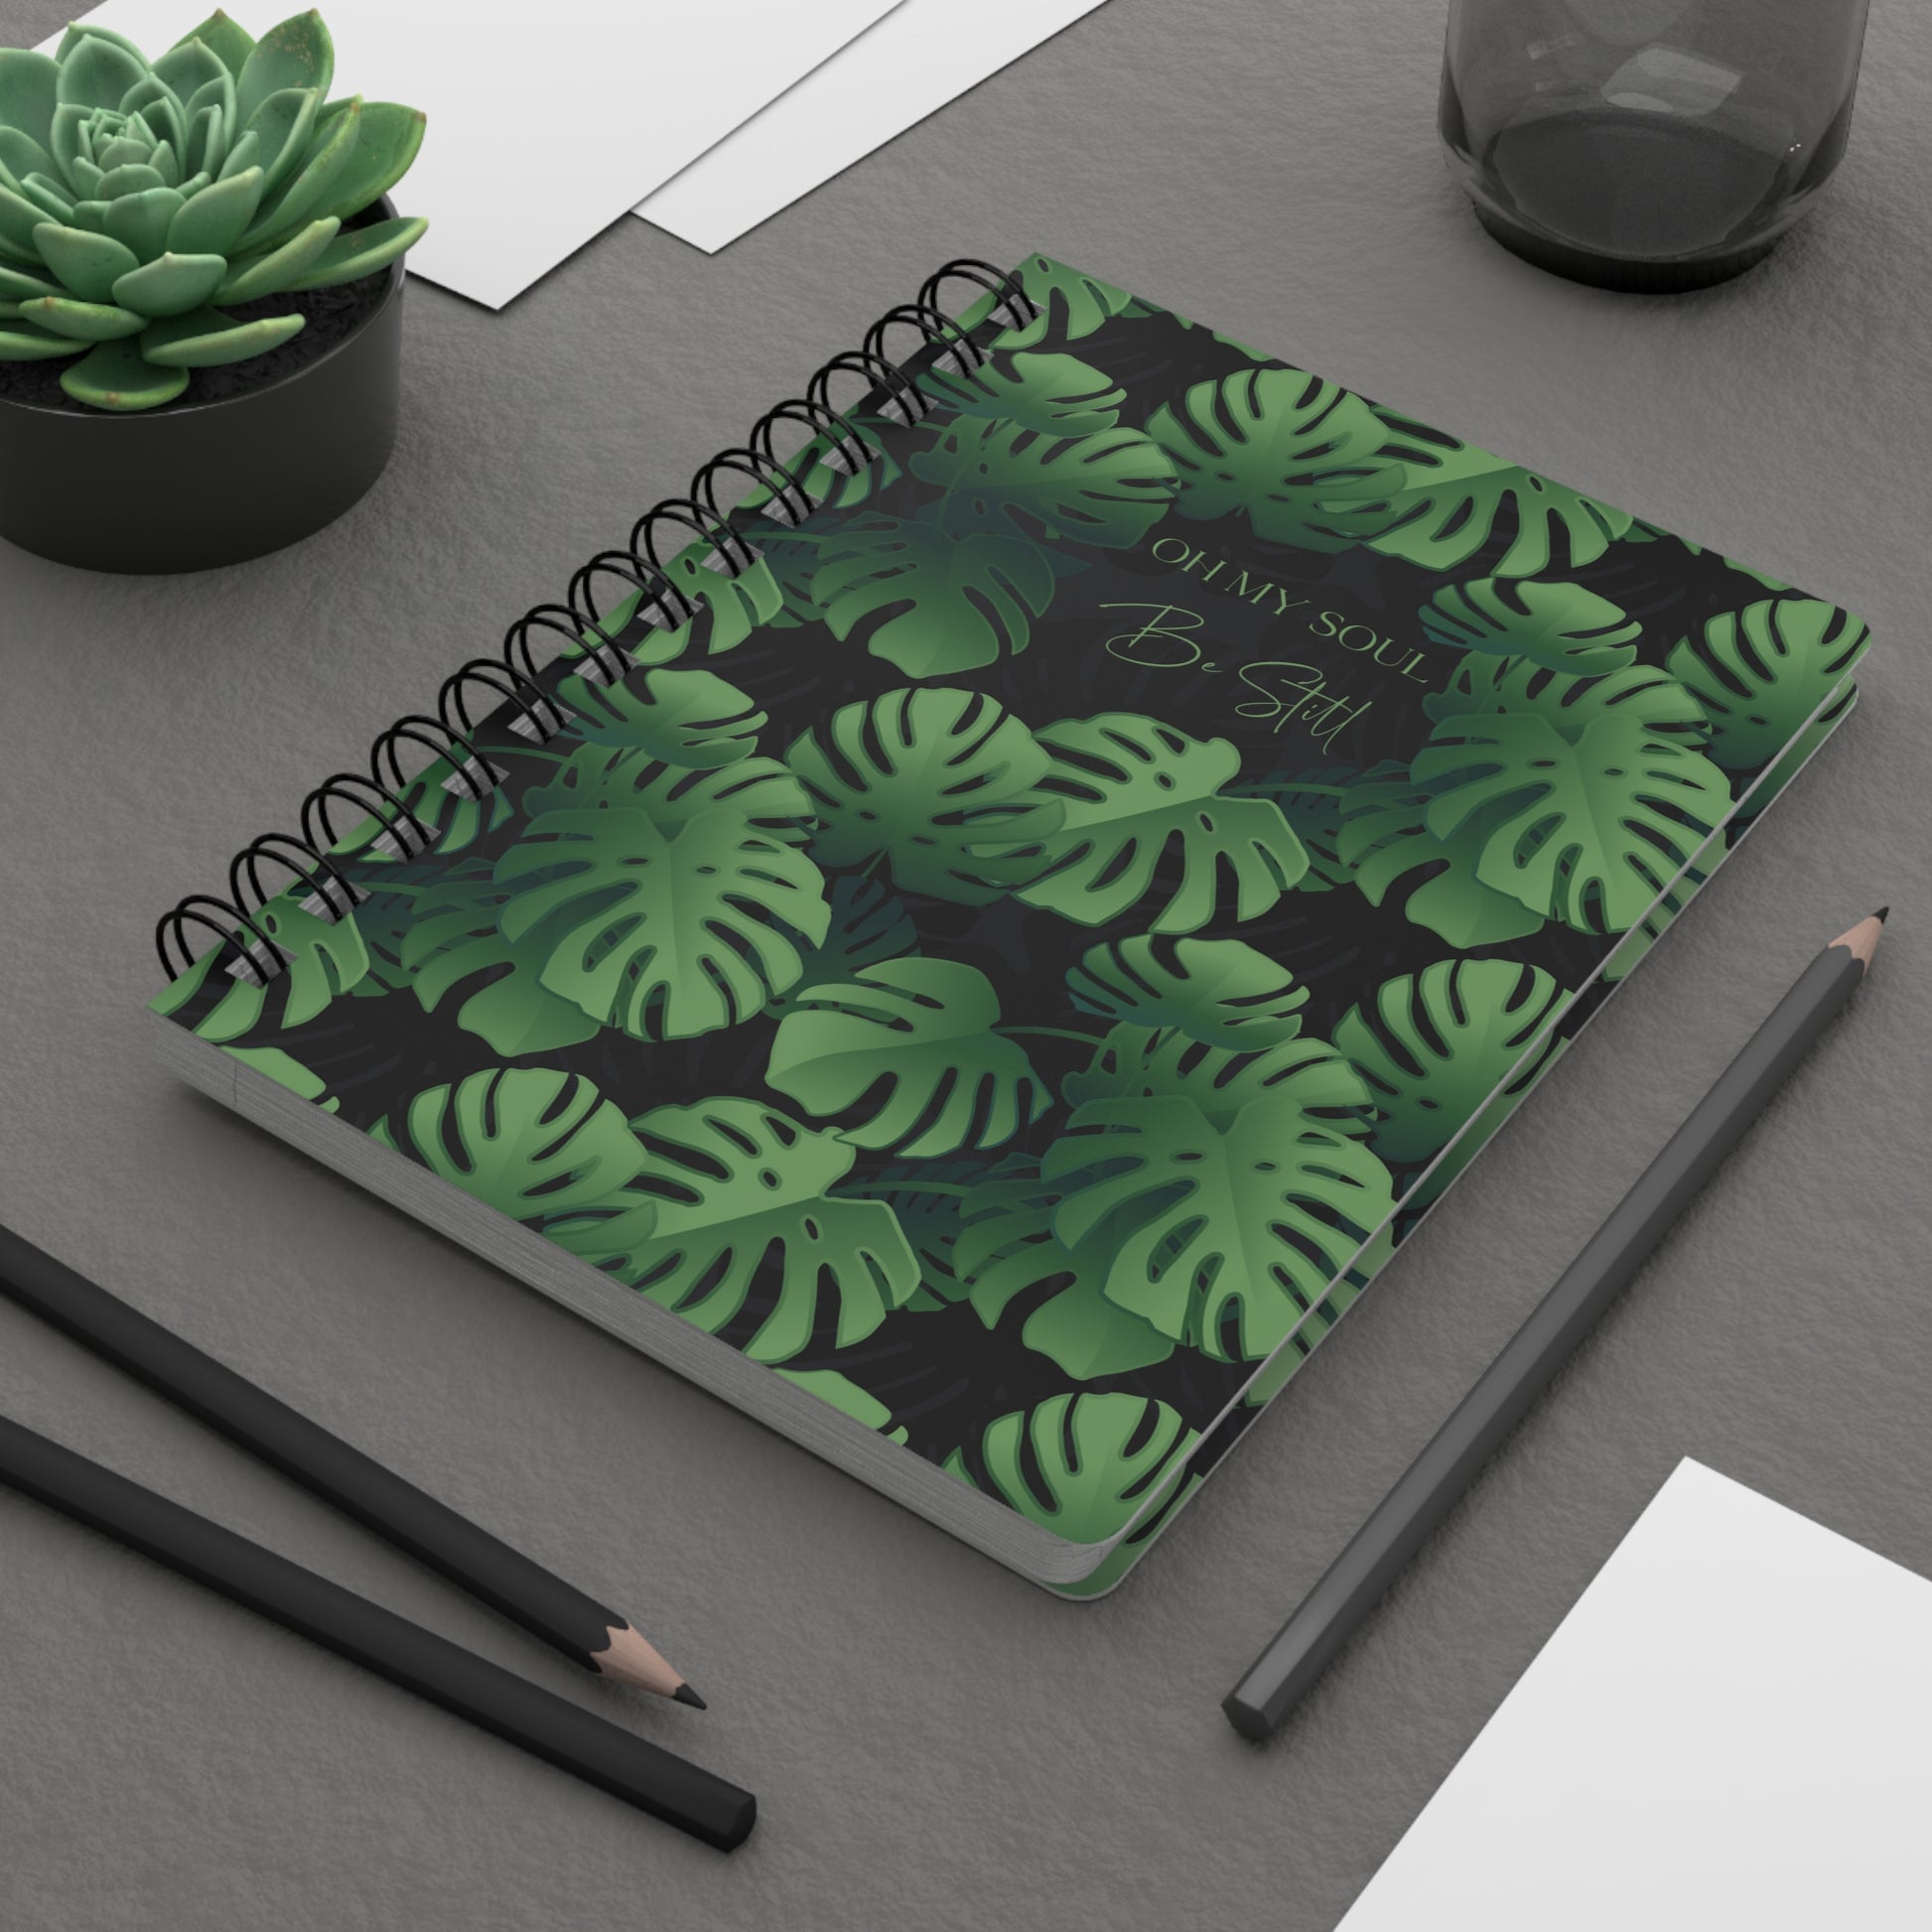 Oh My Soul Be Still all over print spiral bound journal notebook